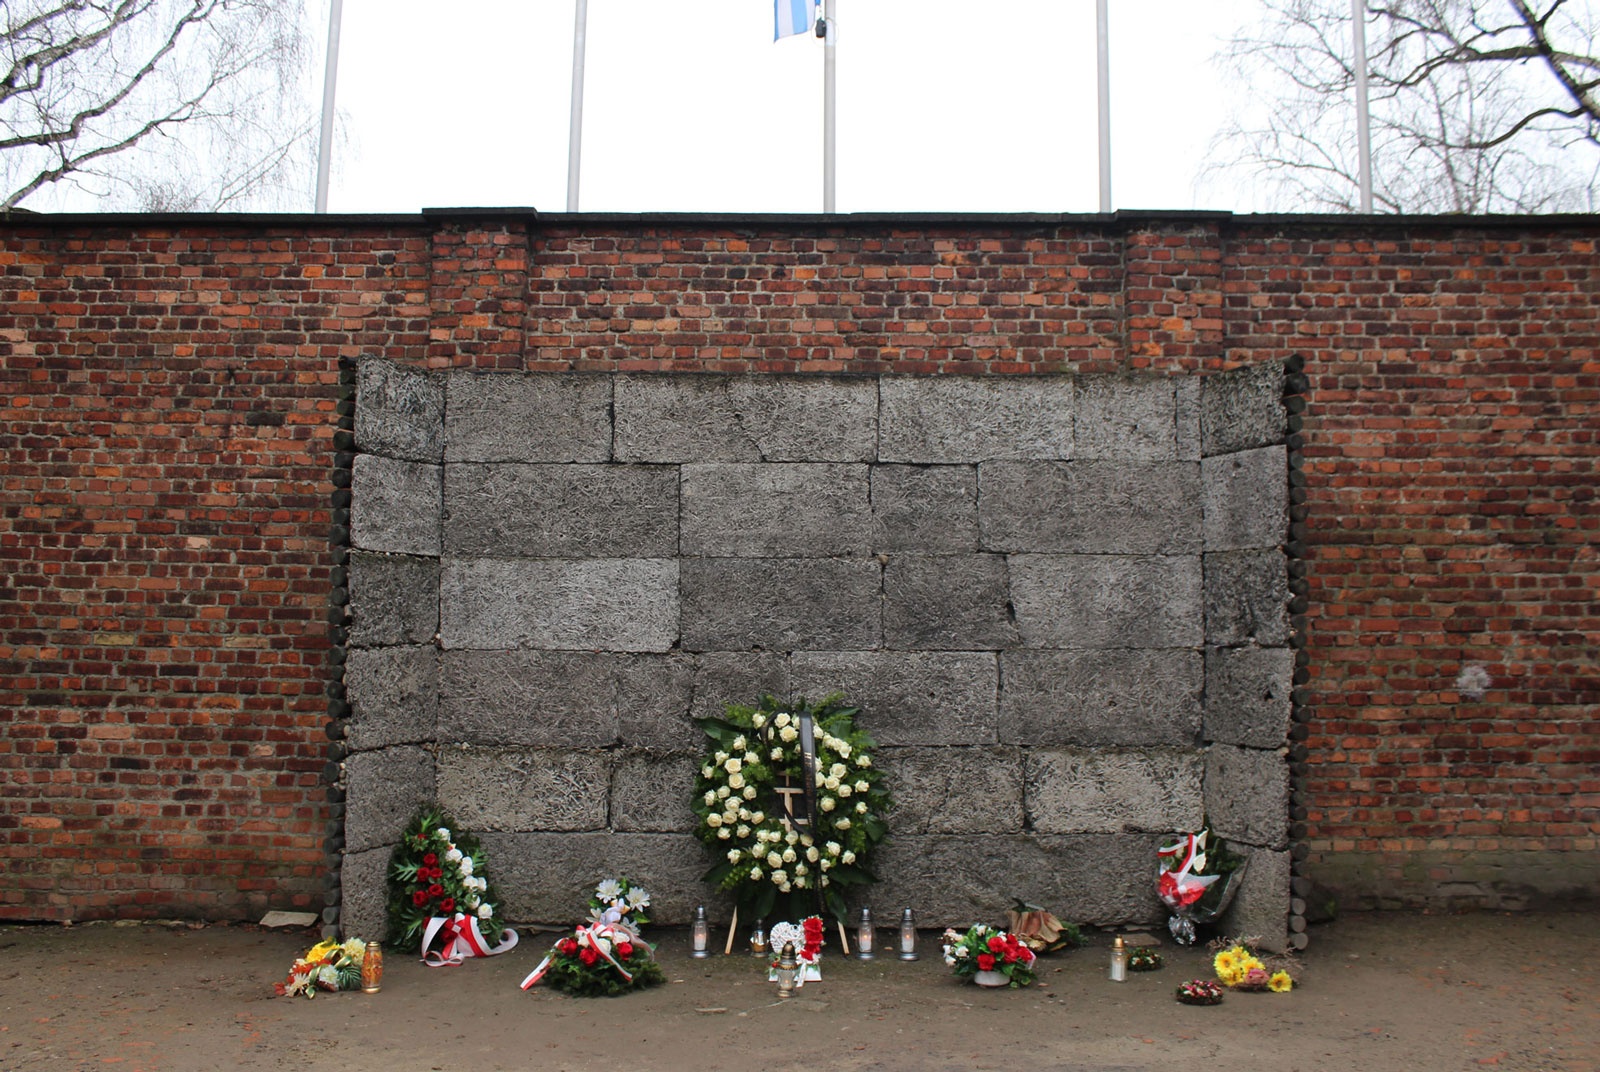 Execution wall, with floral arrangements